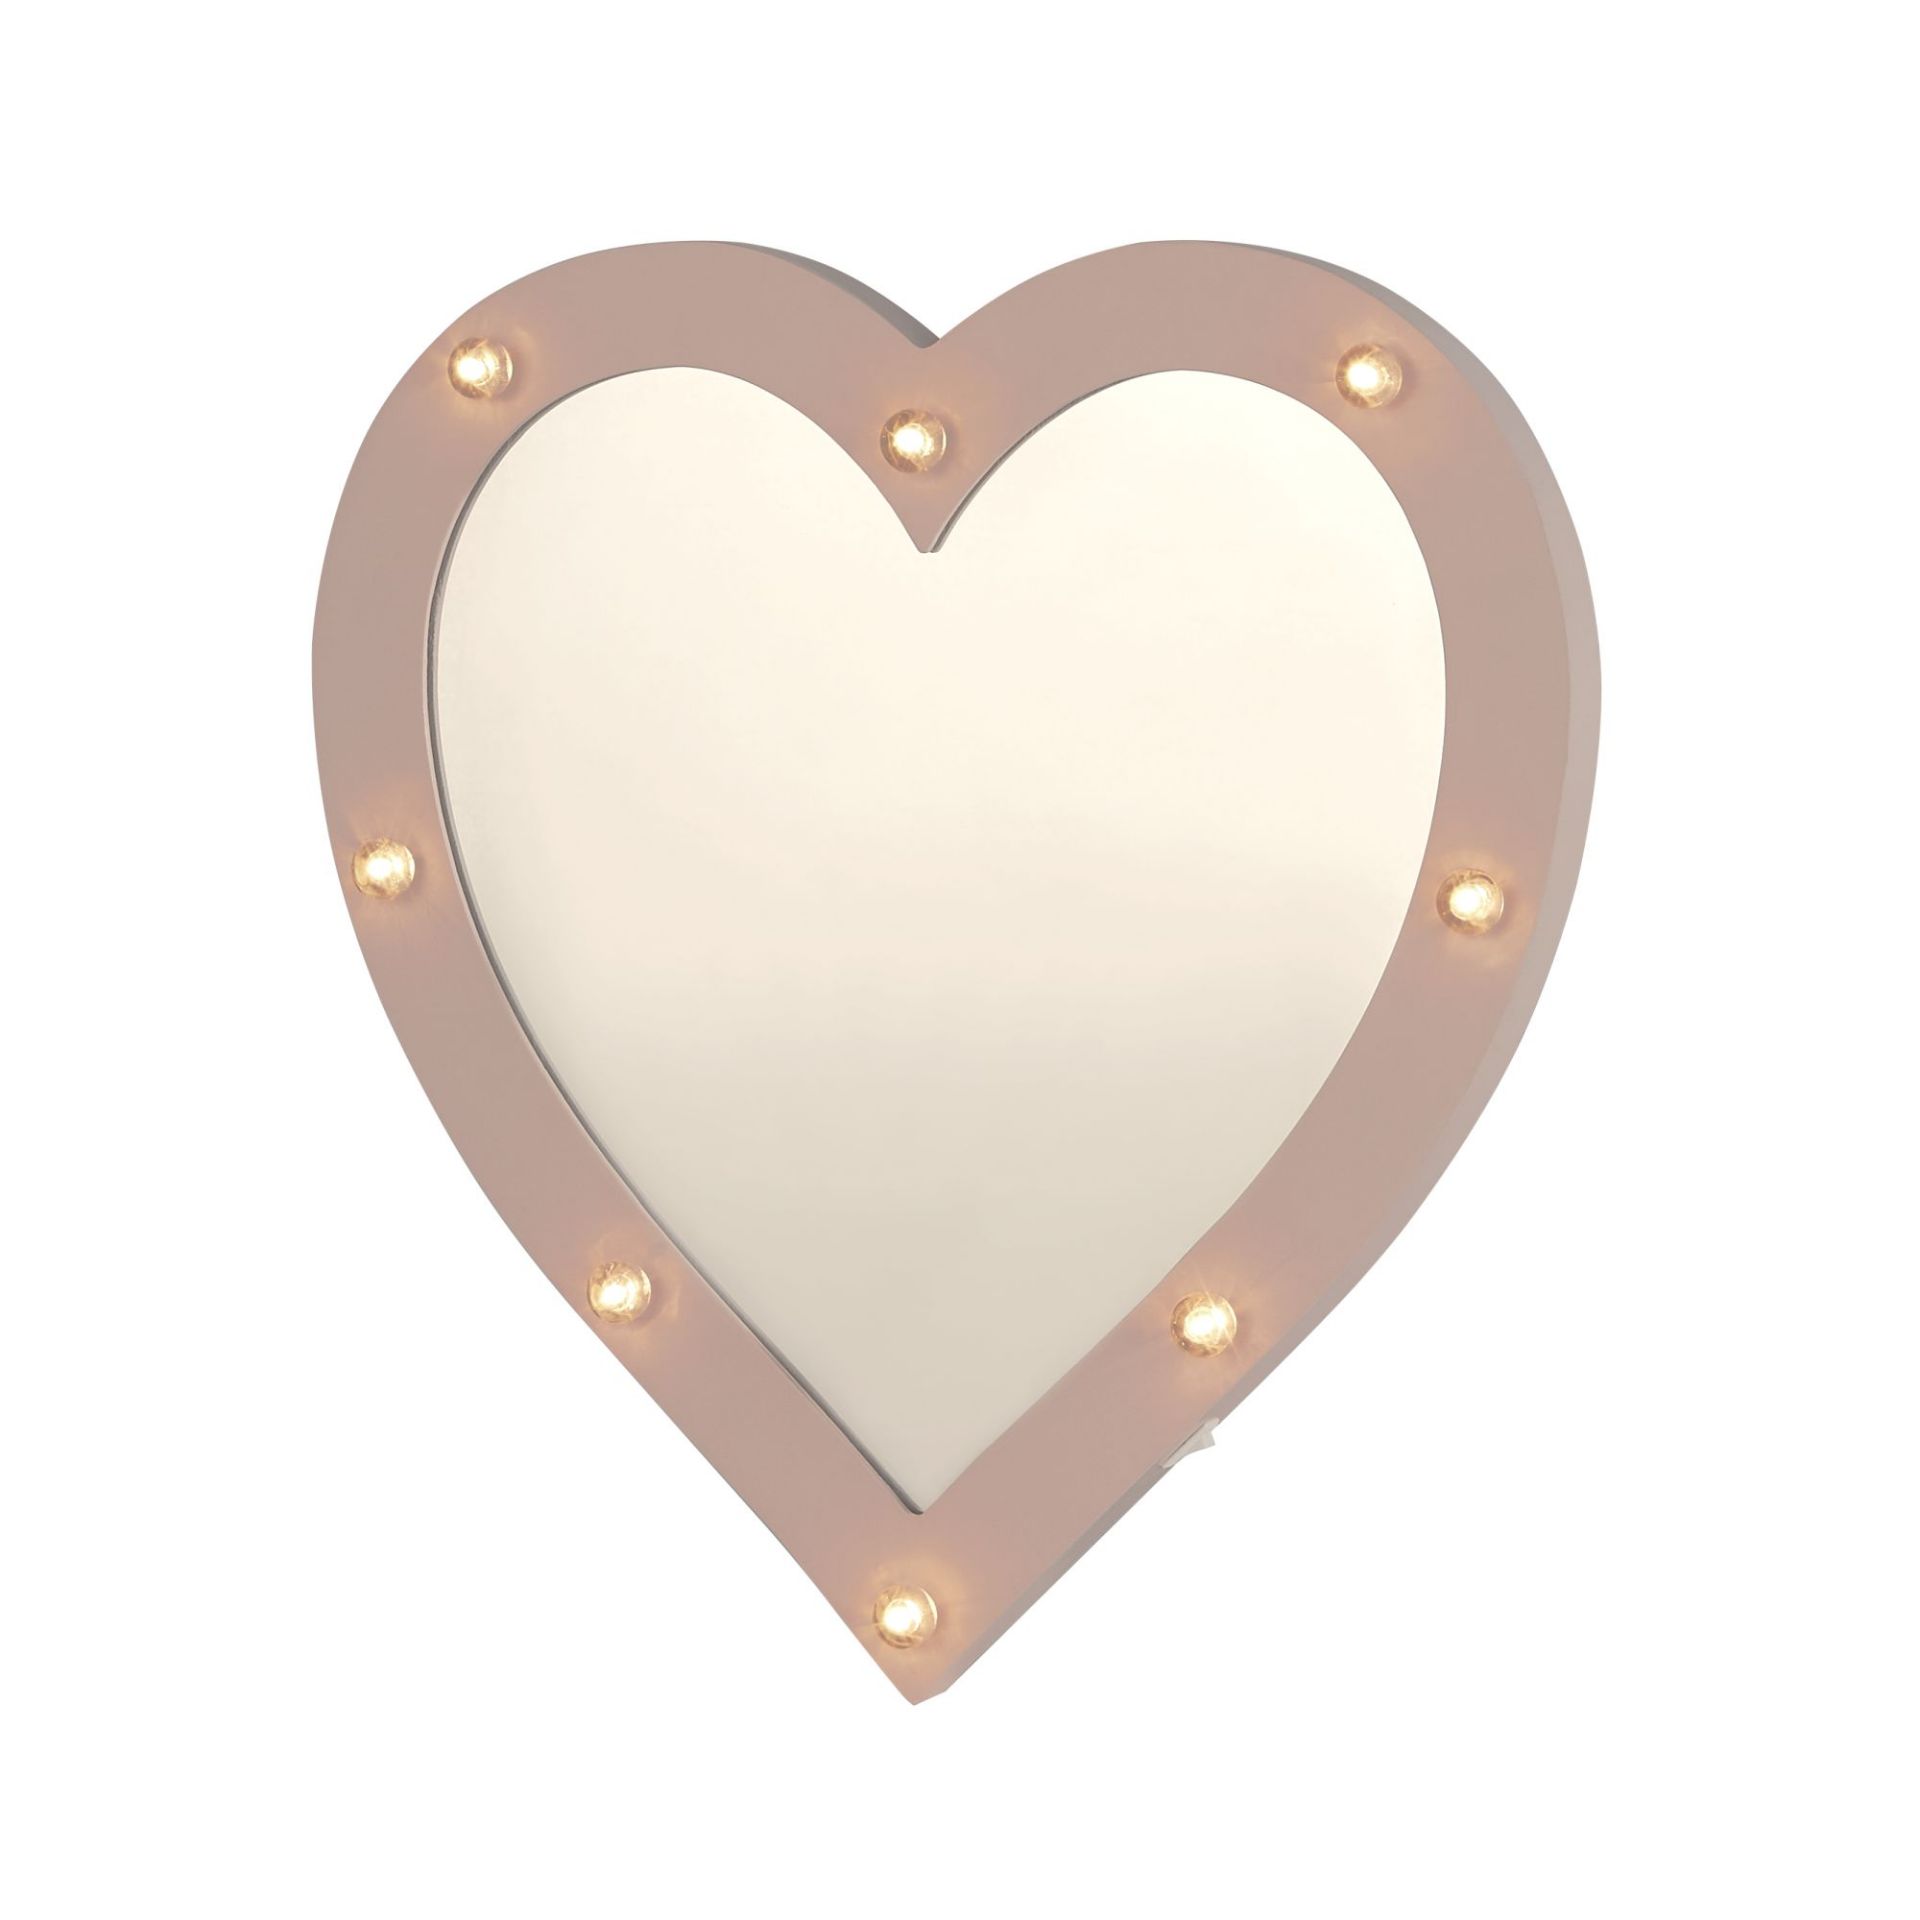 PINK HEART MIRROR WITH 8 LED LIGHTS, 31CM HIGH, 0.36W. Ideal for a bedroom or make up mirror.